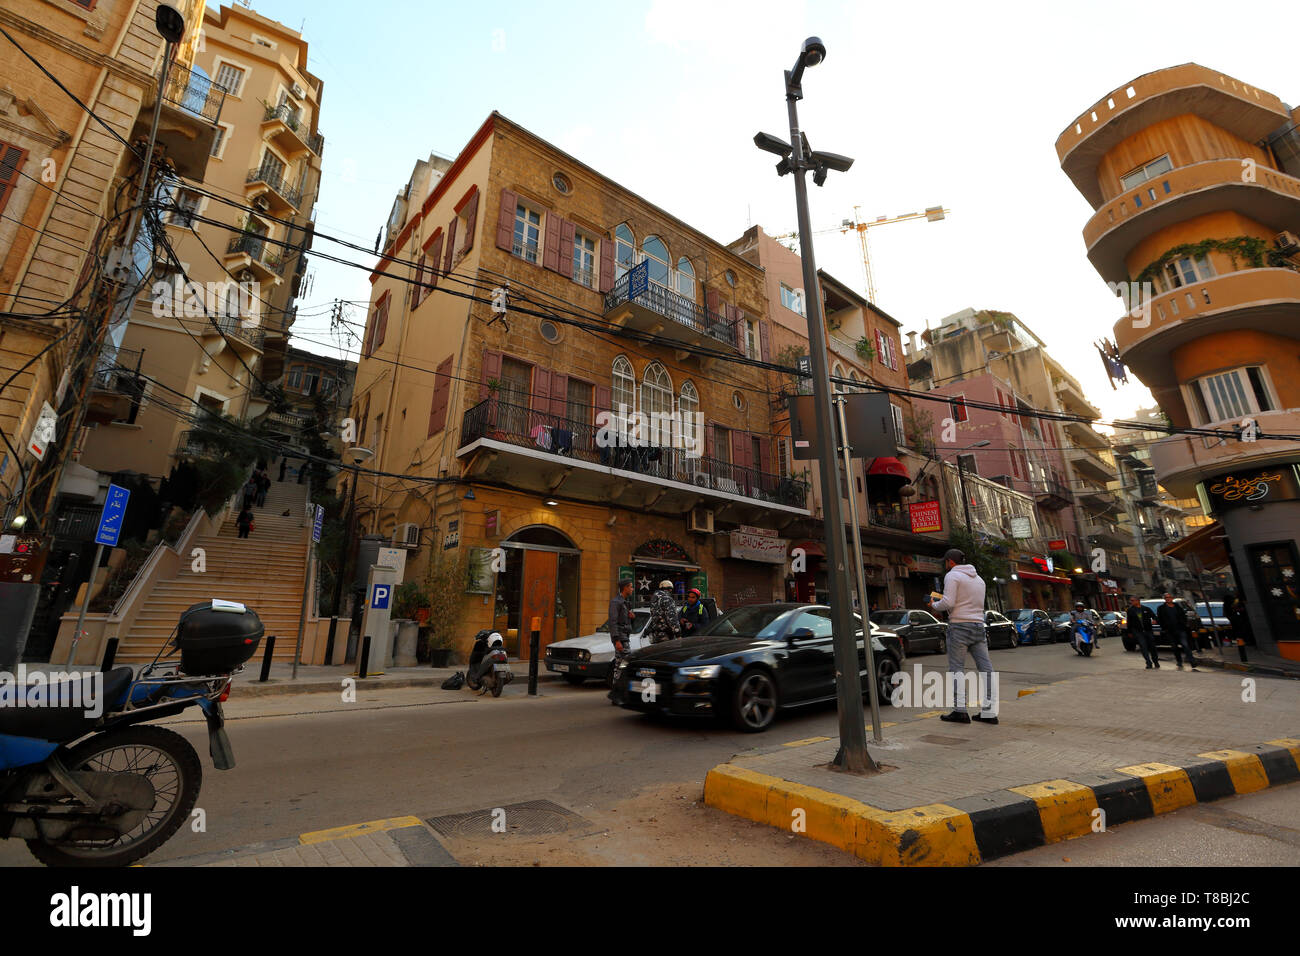 Editorial Image Beirut, Lebanon - 12.29.2017: City life in the up and coming Mar Mikhael district just off central Beirut. Stock Photo